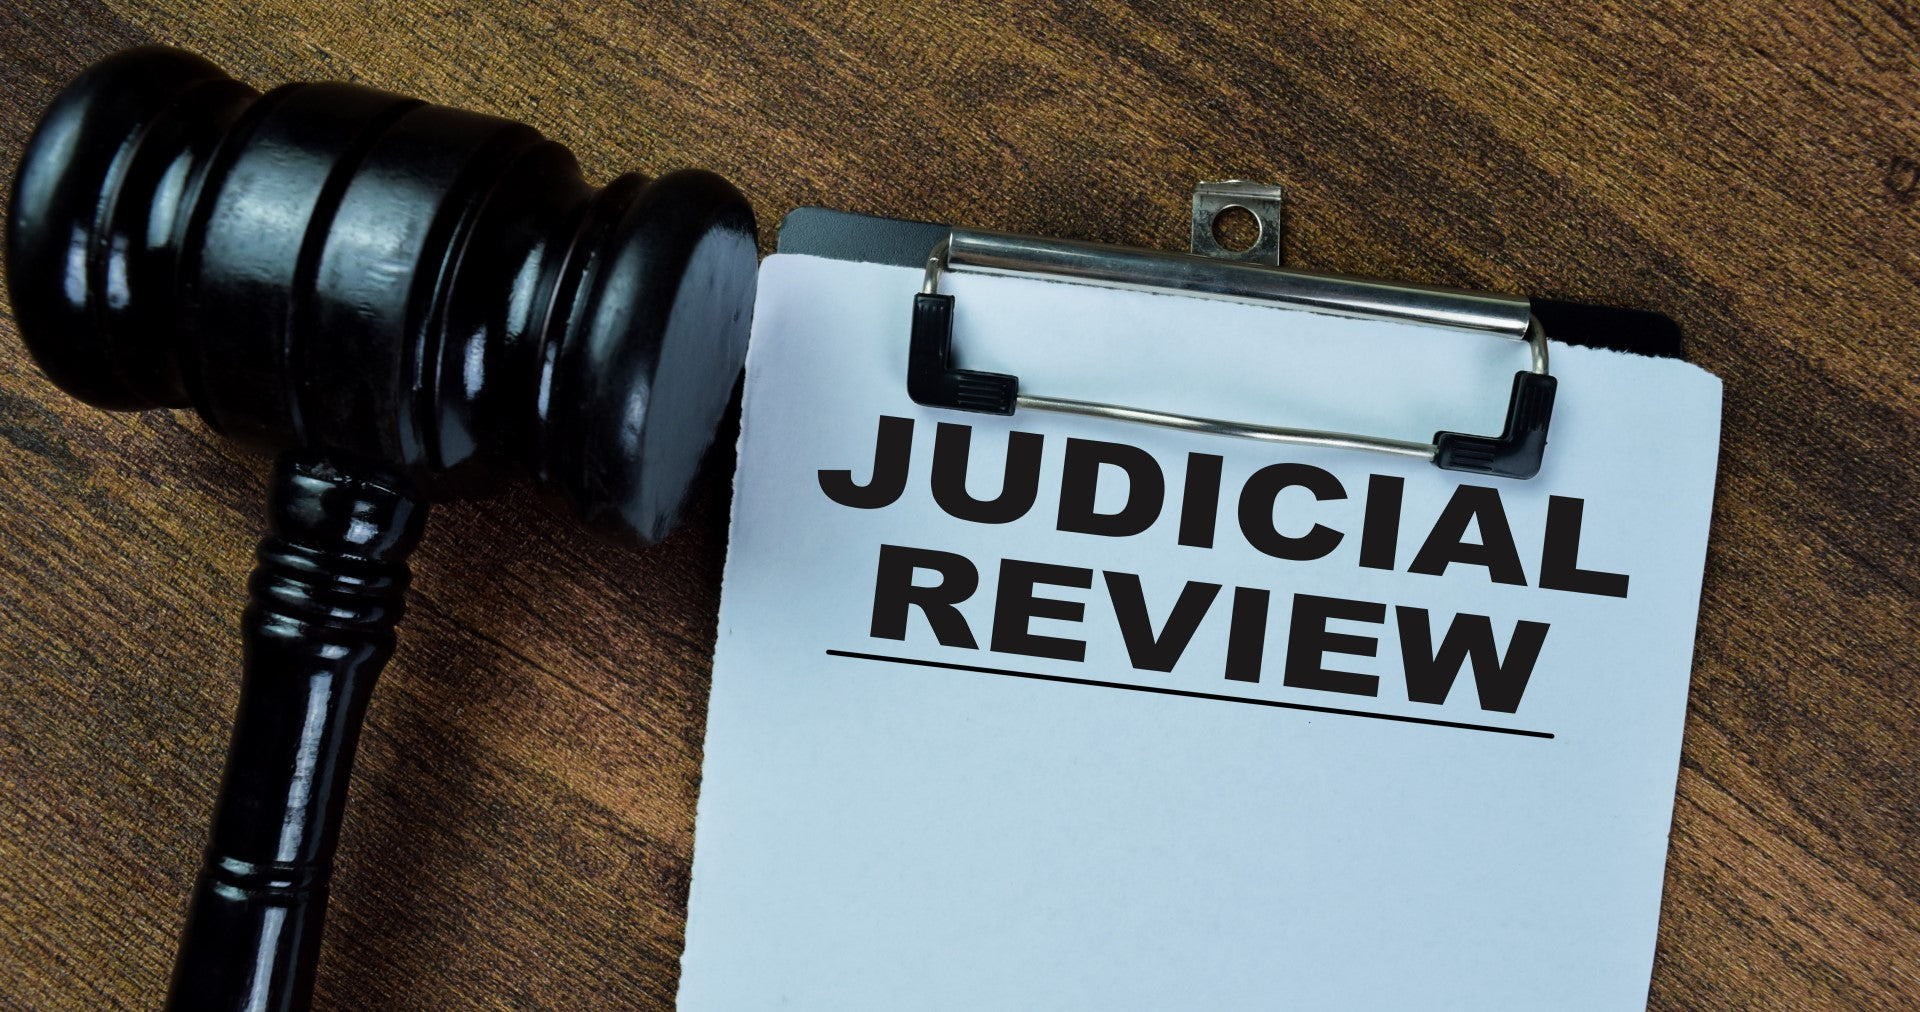 Origin of Judicial Review in the United States